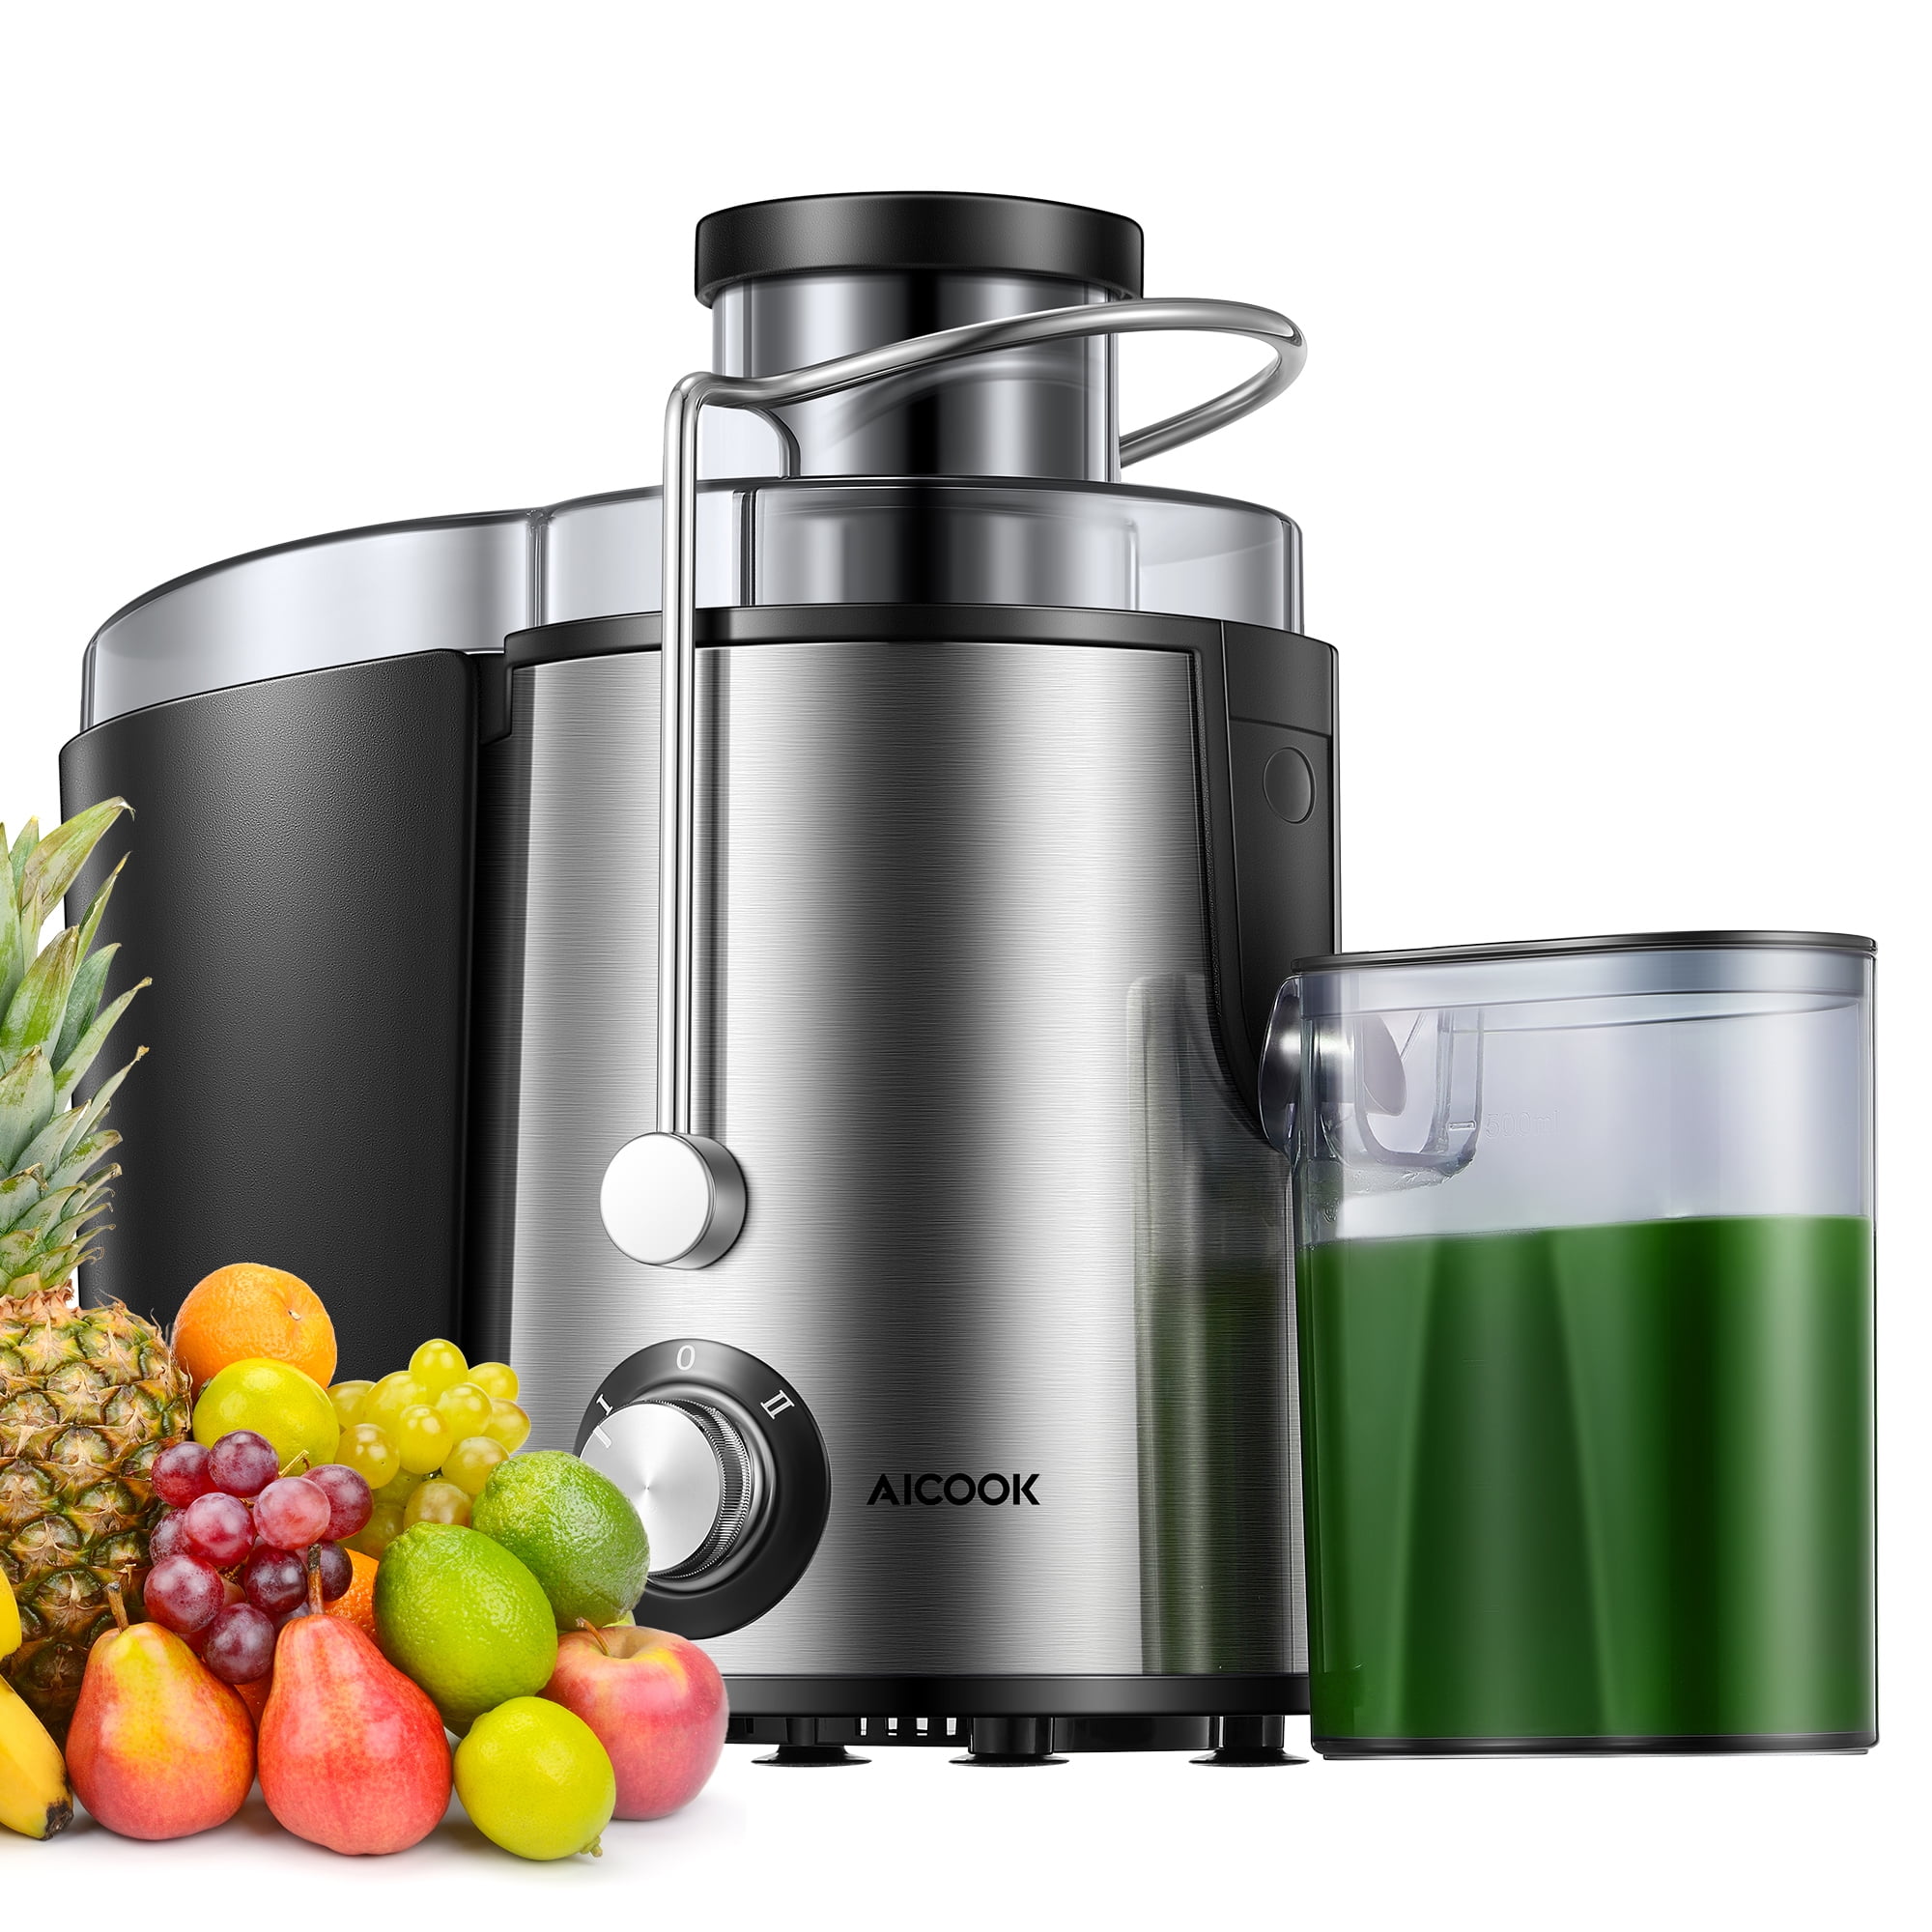 Red Centrifugal Juicer Machine With Pulp Separation, 400w Powerful Motor,  65mm Wide Mouth For Fruits & Vegetables, 500ml Juice Cup With Foam  Separator For Optimized Taste, Micro Switch And Copper Power Cord